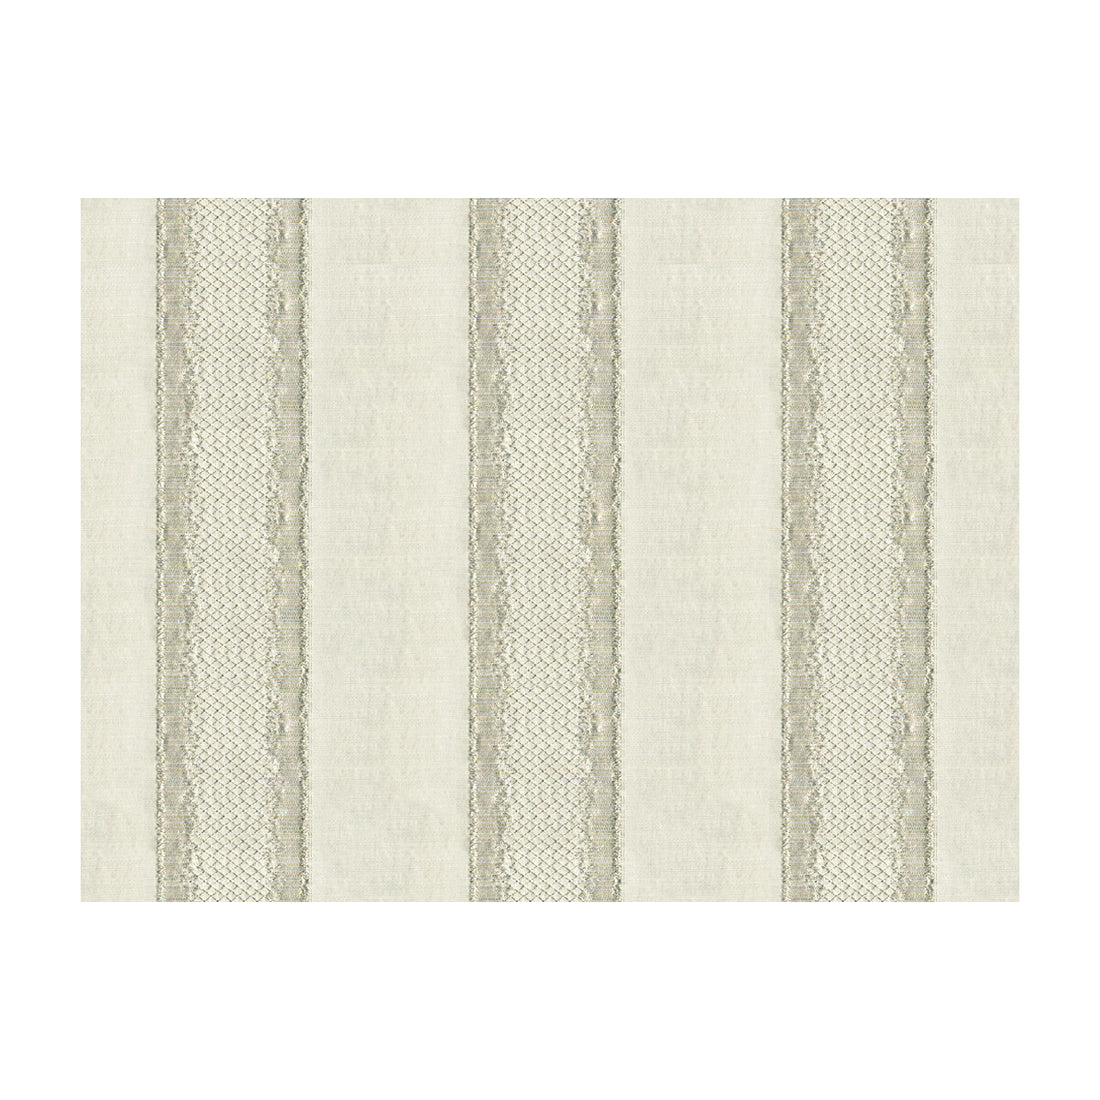 Gilded Stripe fabric in platinum color - pattern 33279.11.0 - by Kravet Couture in the Modern Luxe collection